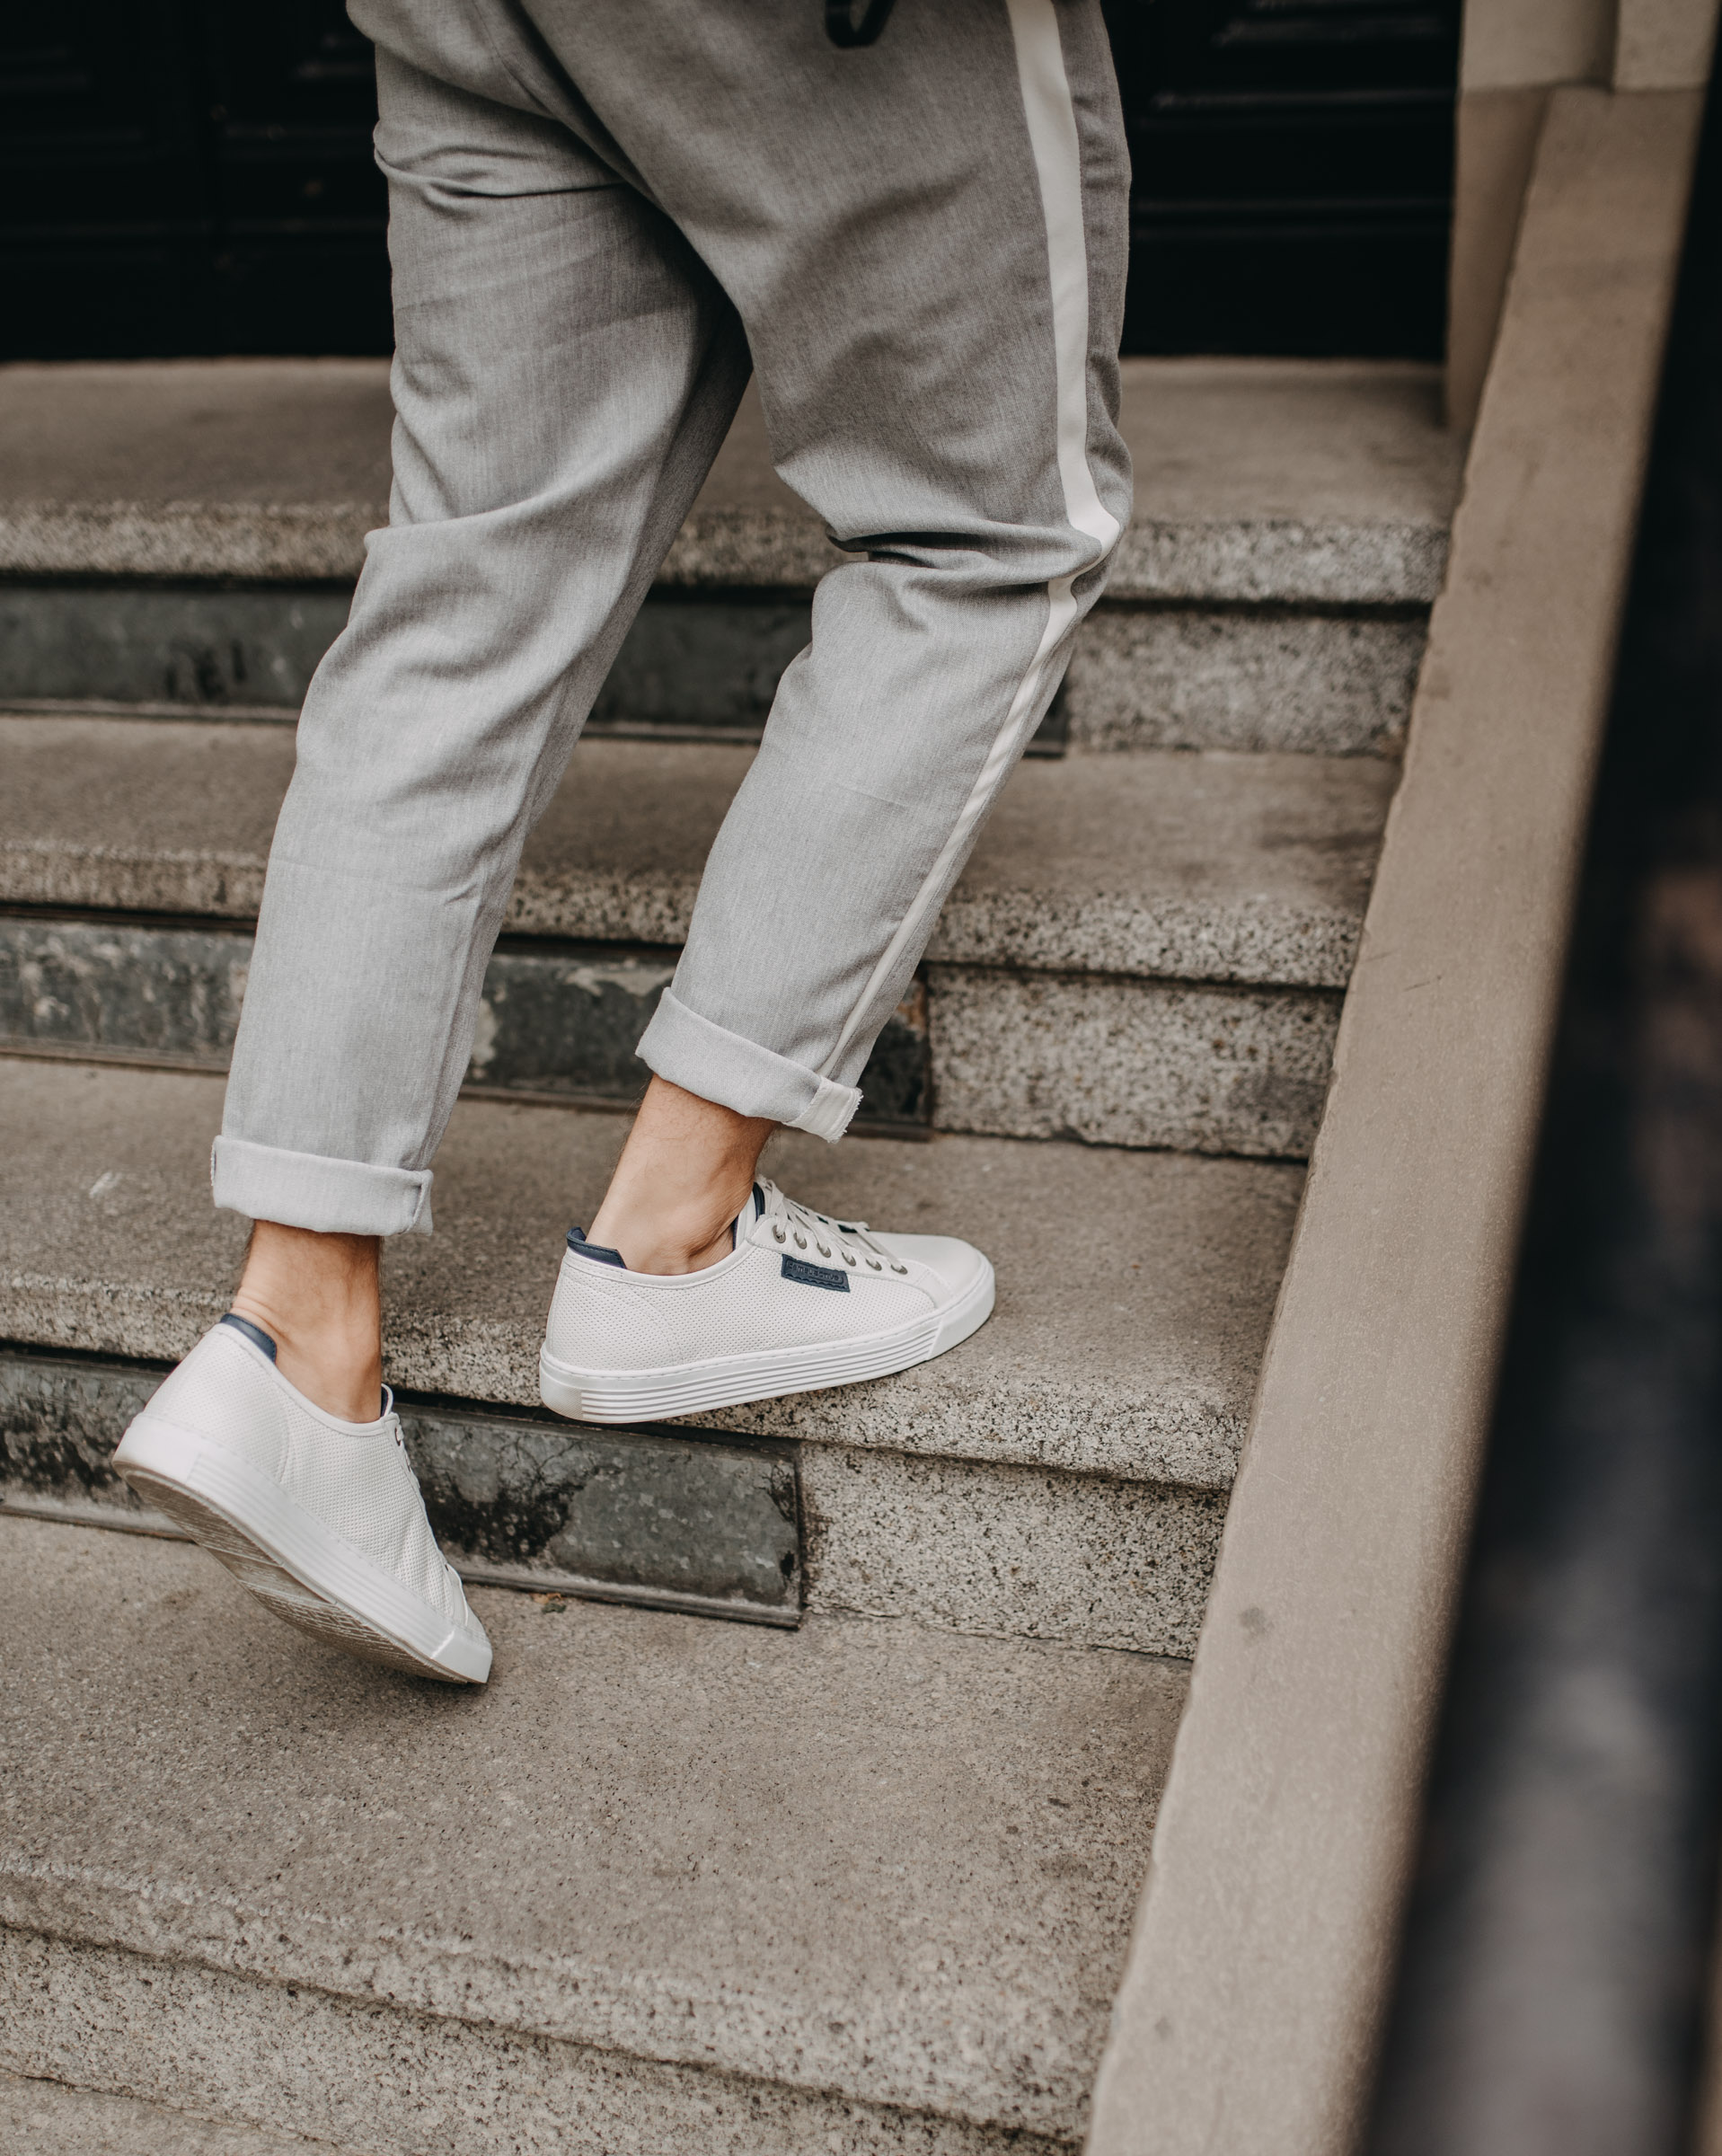 Tommeezjerry-Lifestyleblog-Fashionblog-Maennermodeblog-Maennerblog-Modeblog-White-Sneakers-Camel-Active-Casual-Chic-Moderngentleman-Summerstyle-Business-Style